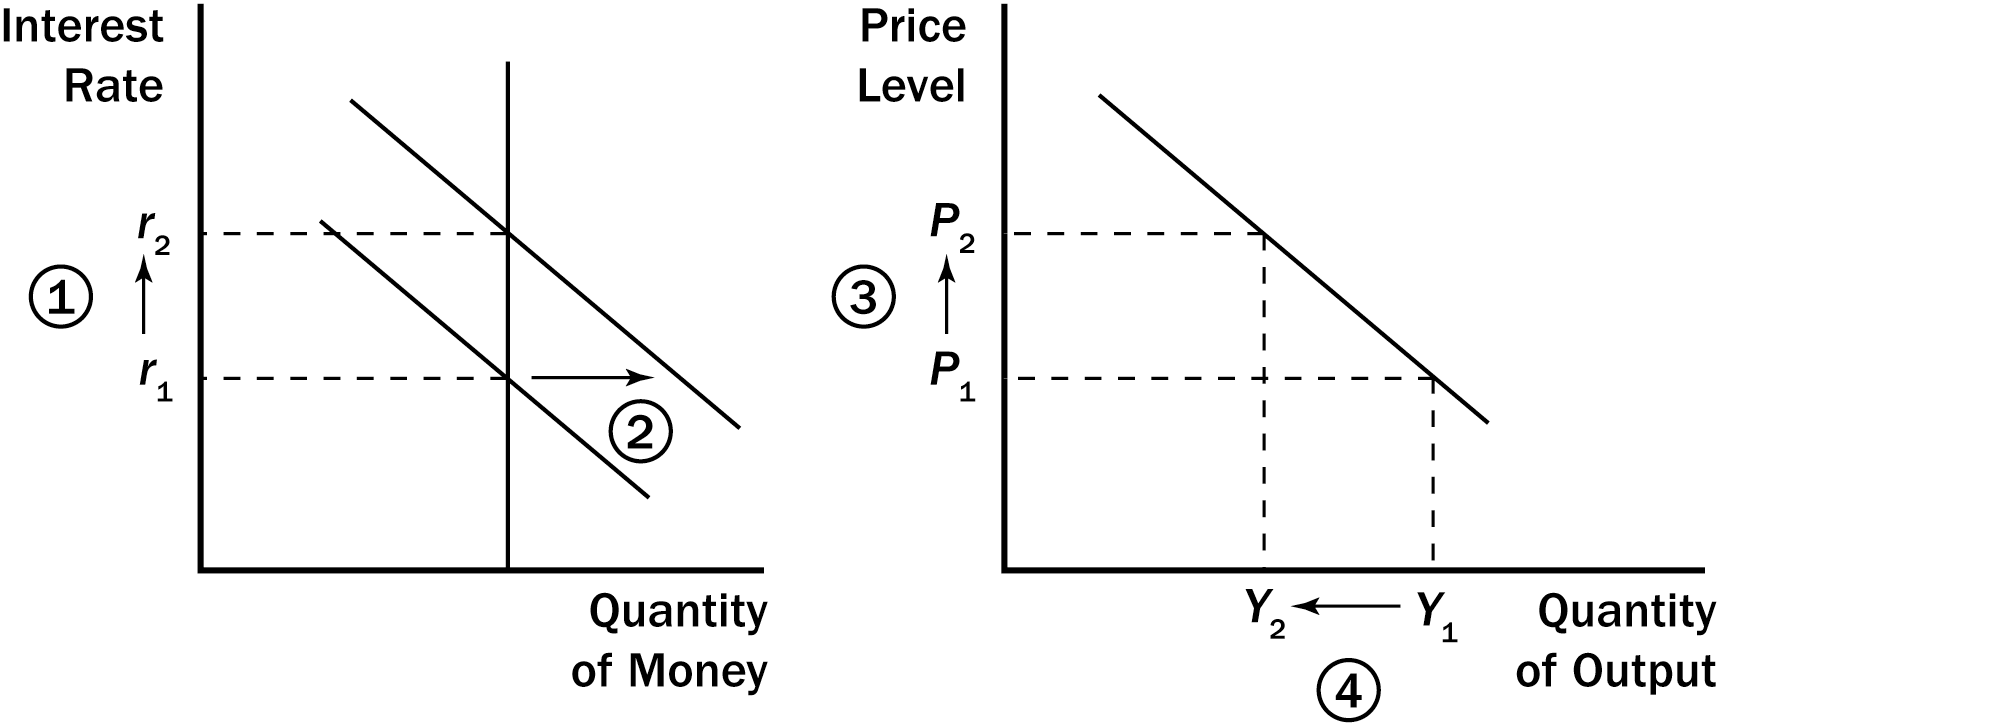 Interest rates and Quantity of money. Price level and Quantity of output.